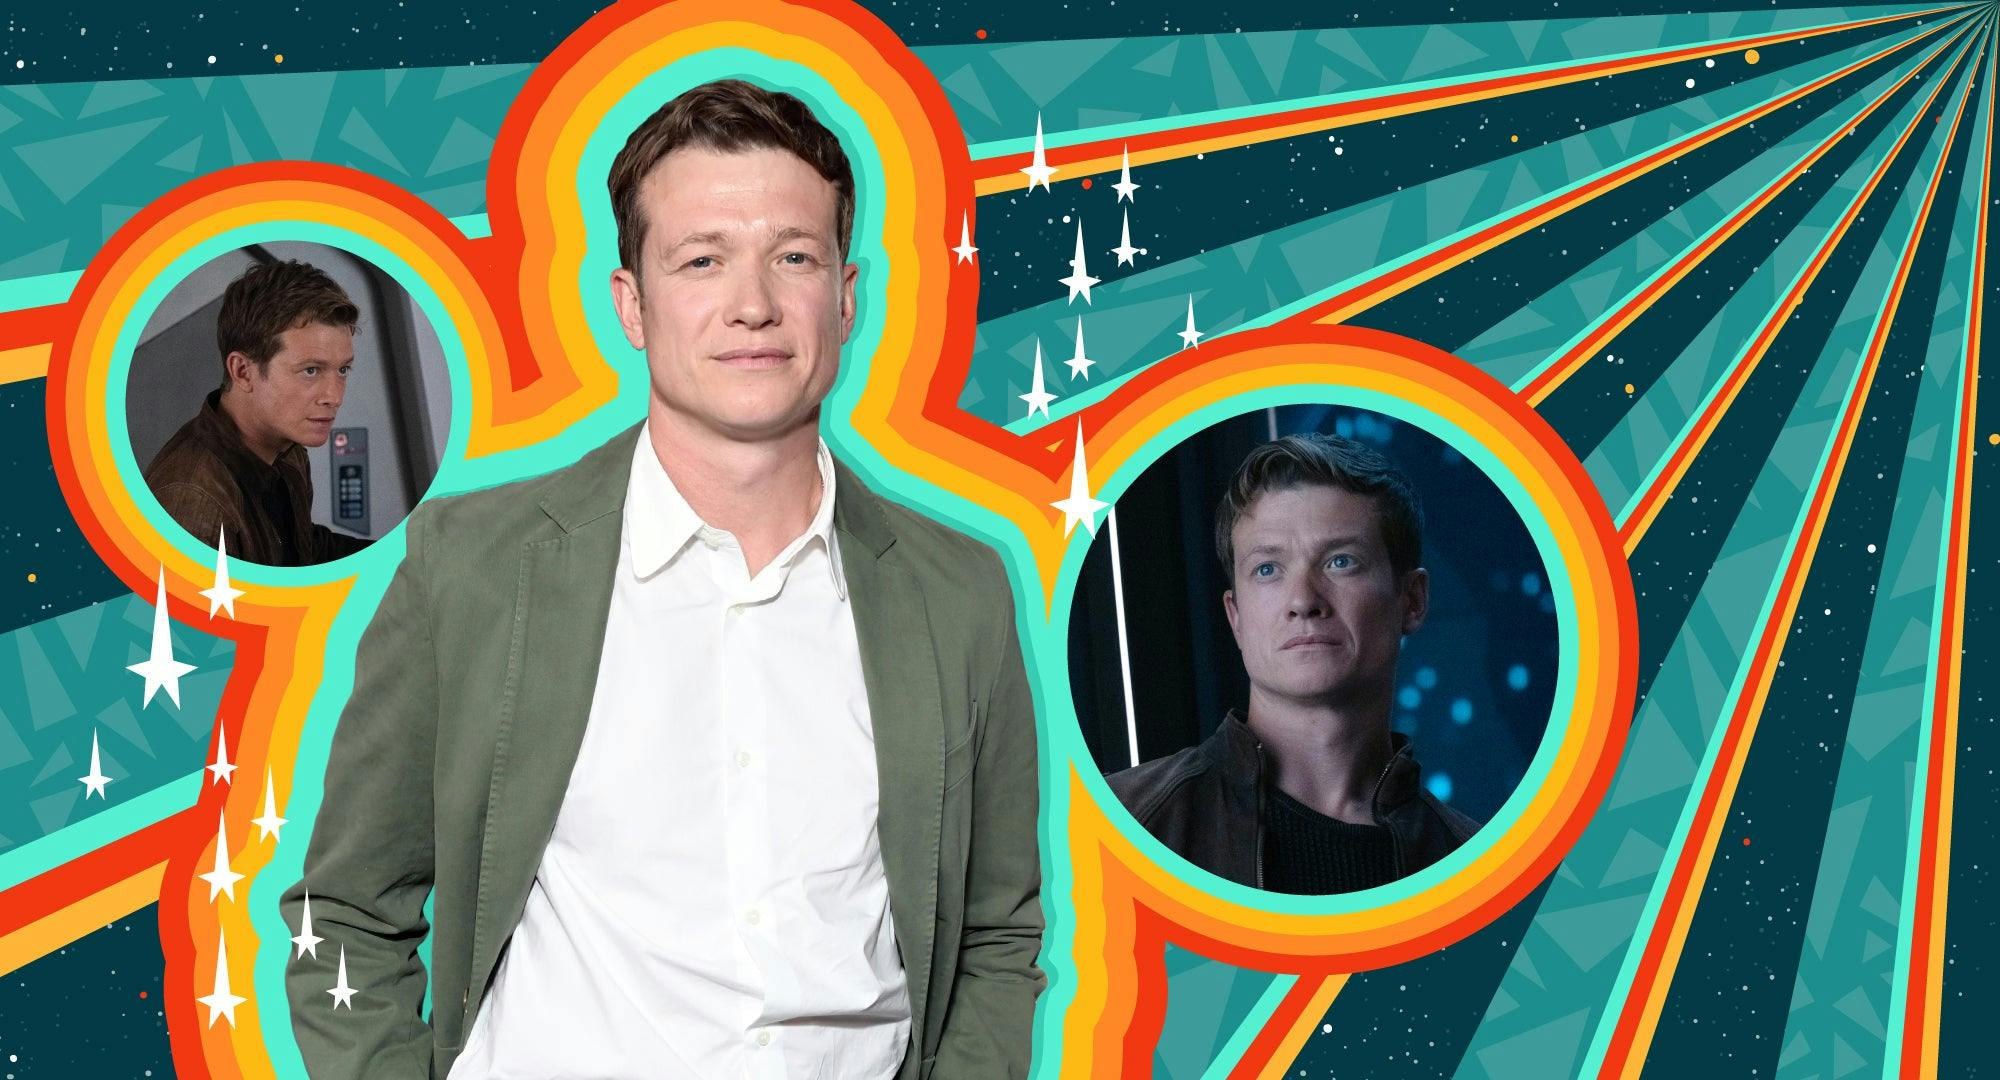 Illustrated banner featuring Ed Speleers and his Star Trek: Picard character Jack Crusher